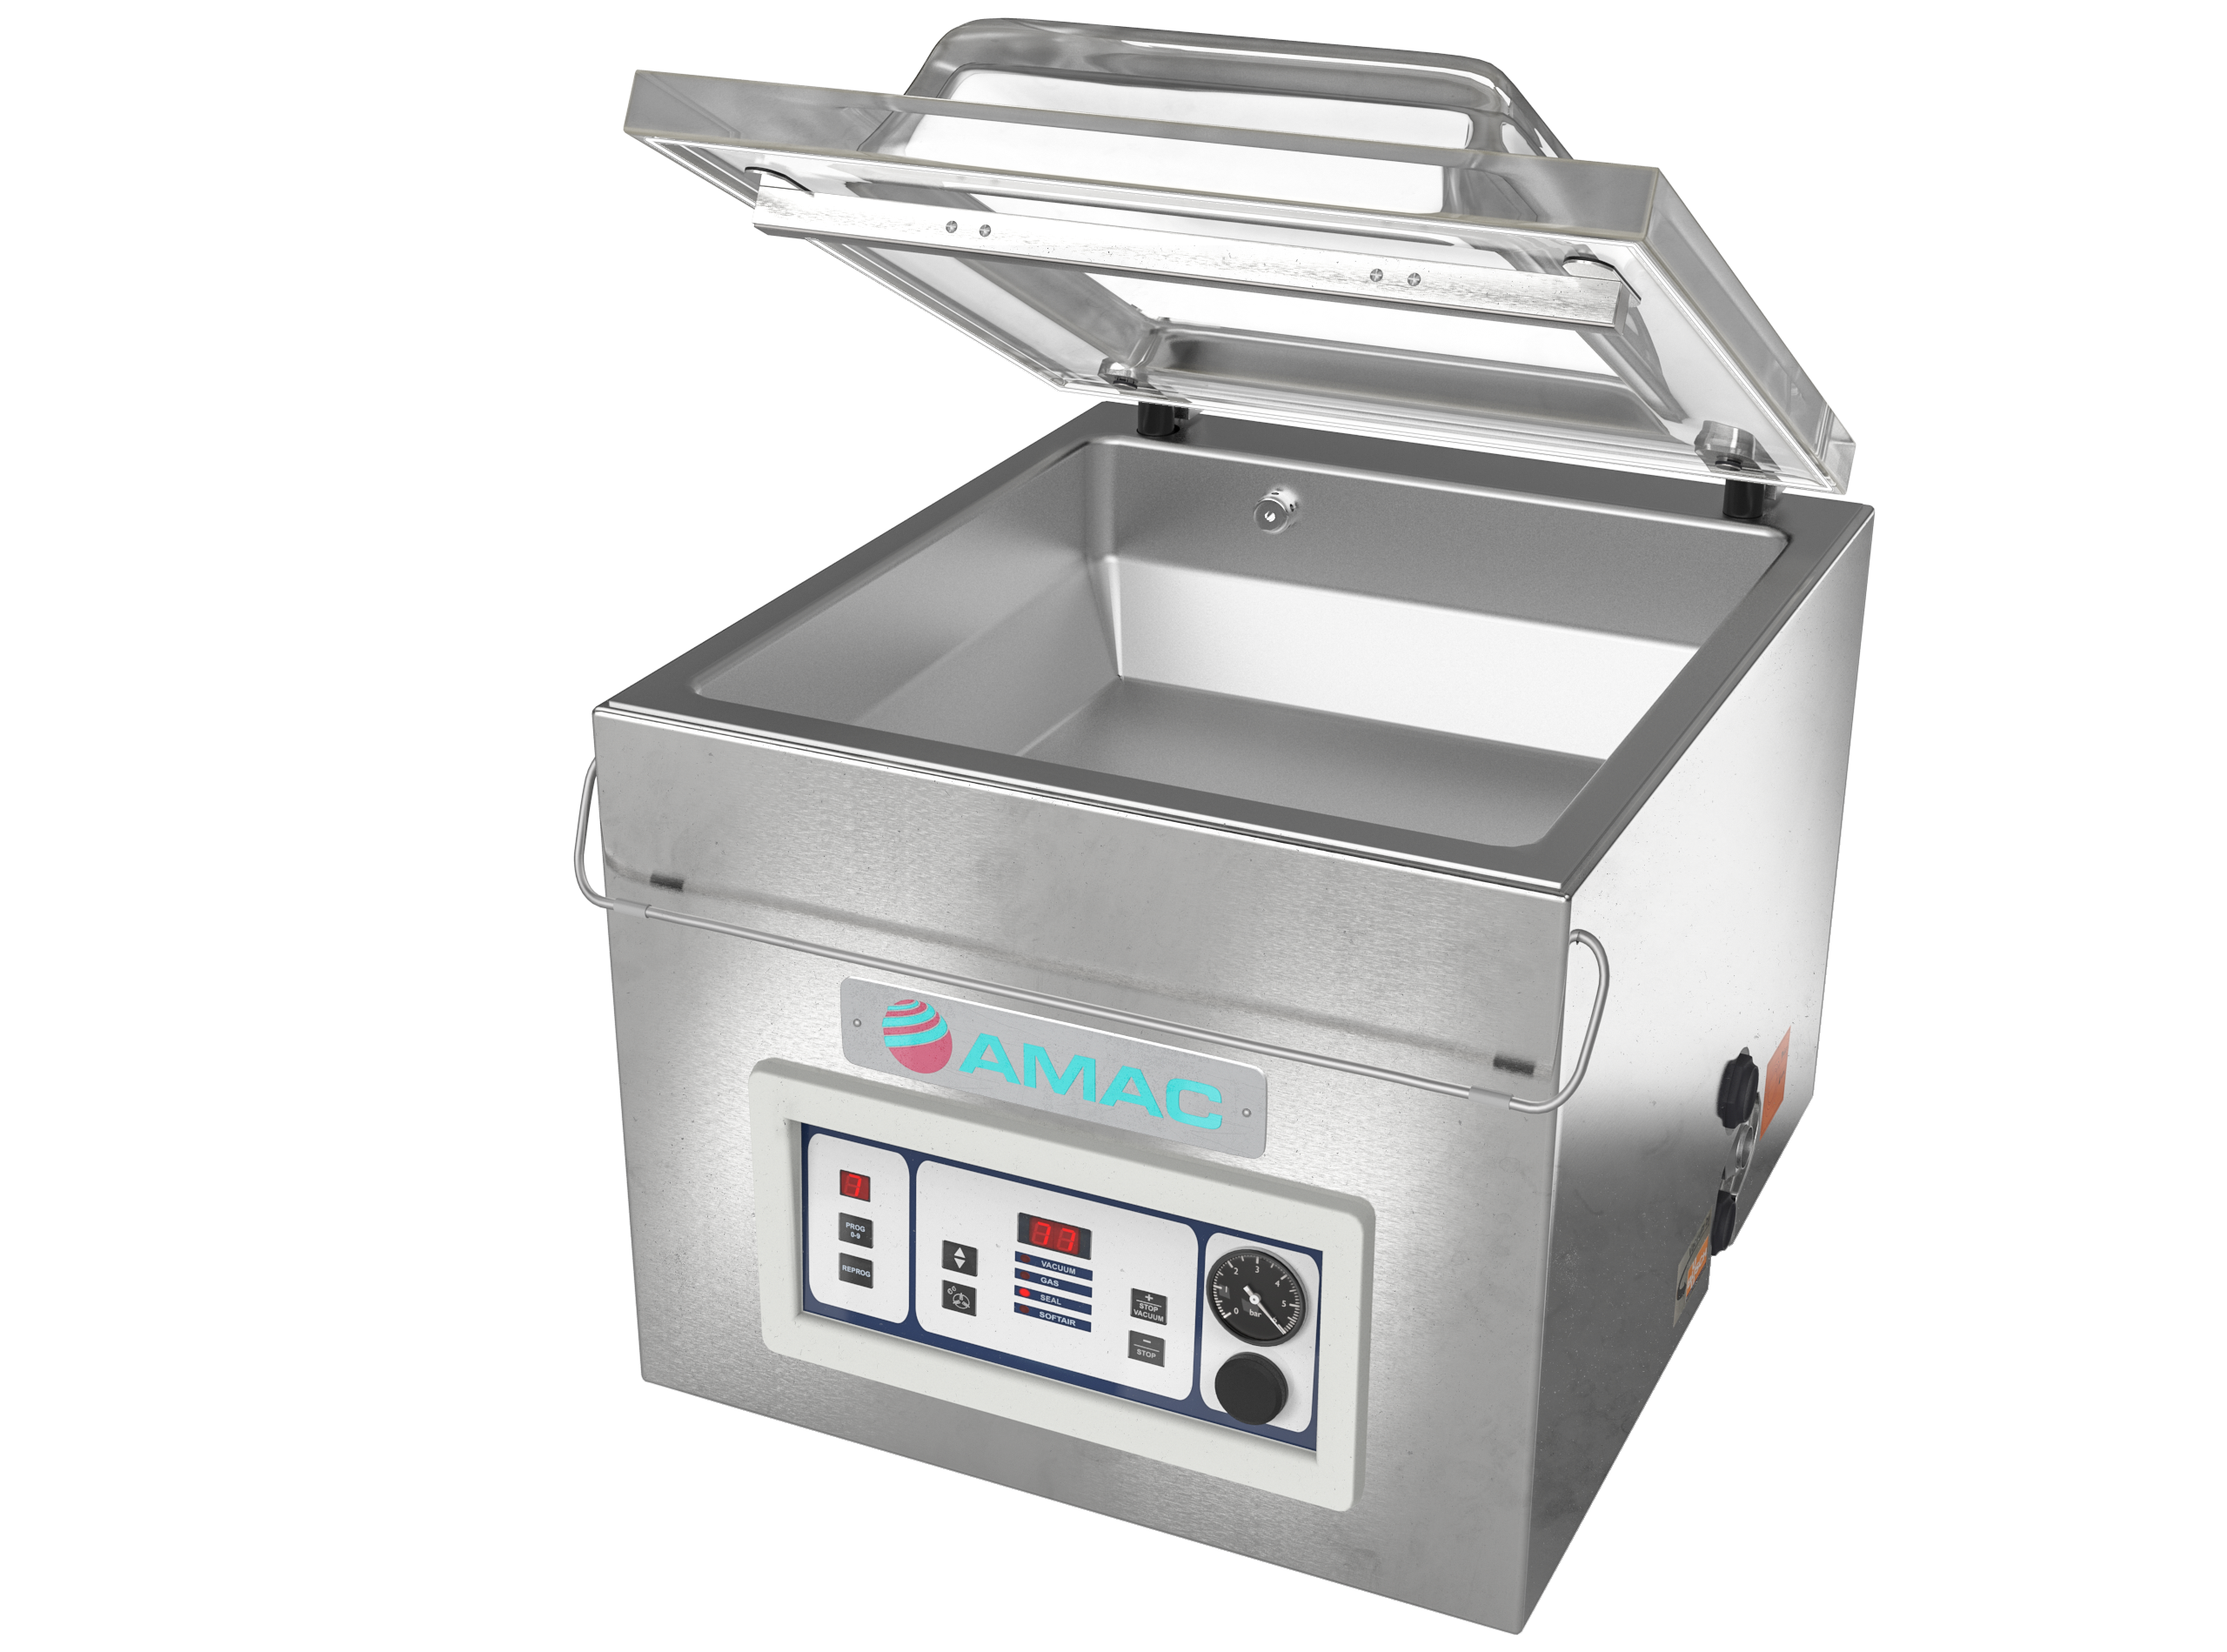 How Does A Chamber Vacuum Sealer Work - Chamber Vacuum Machines